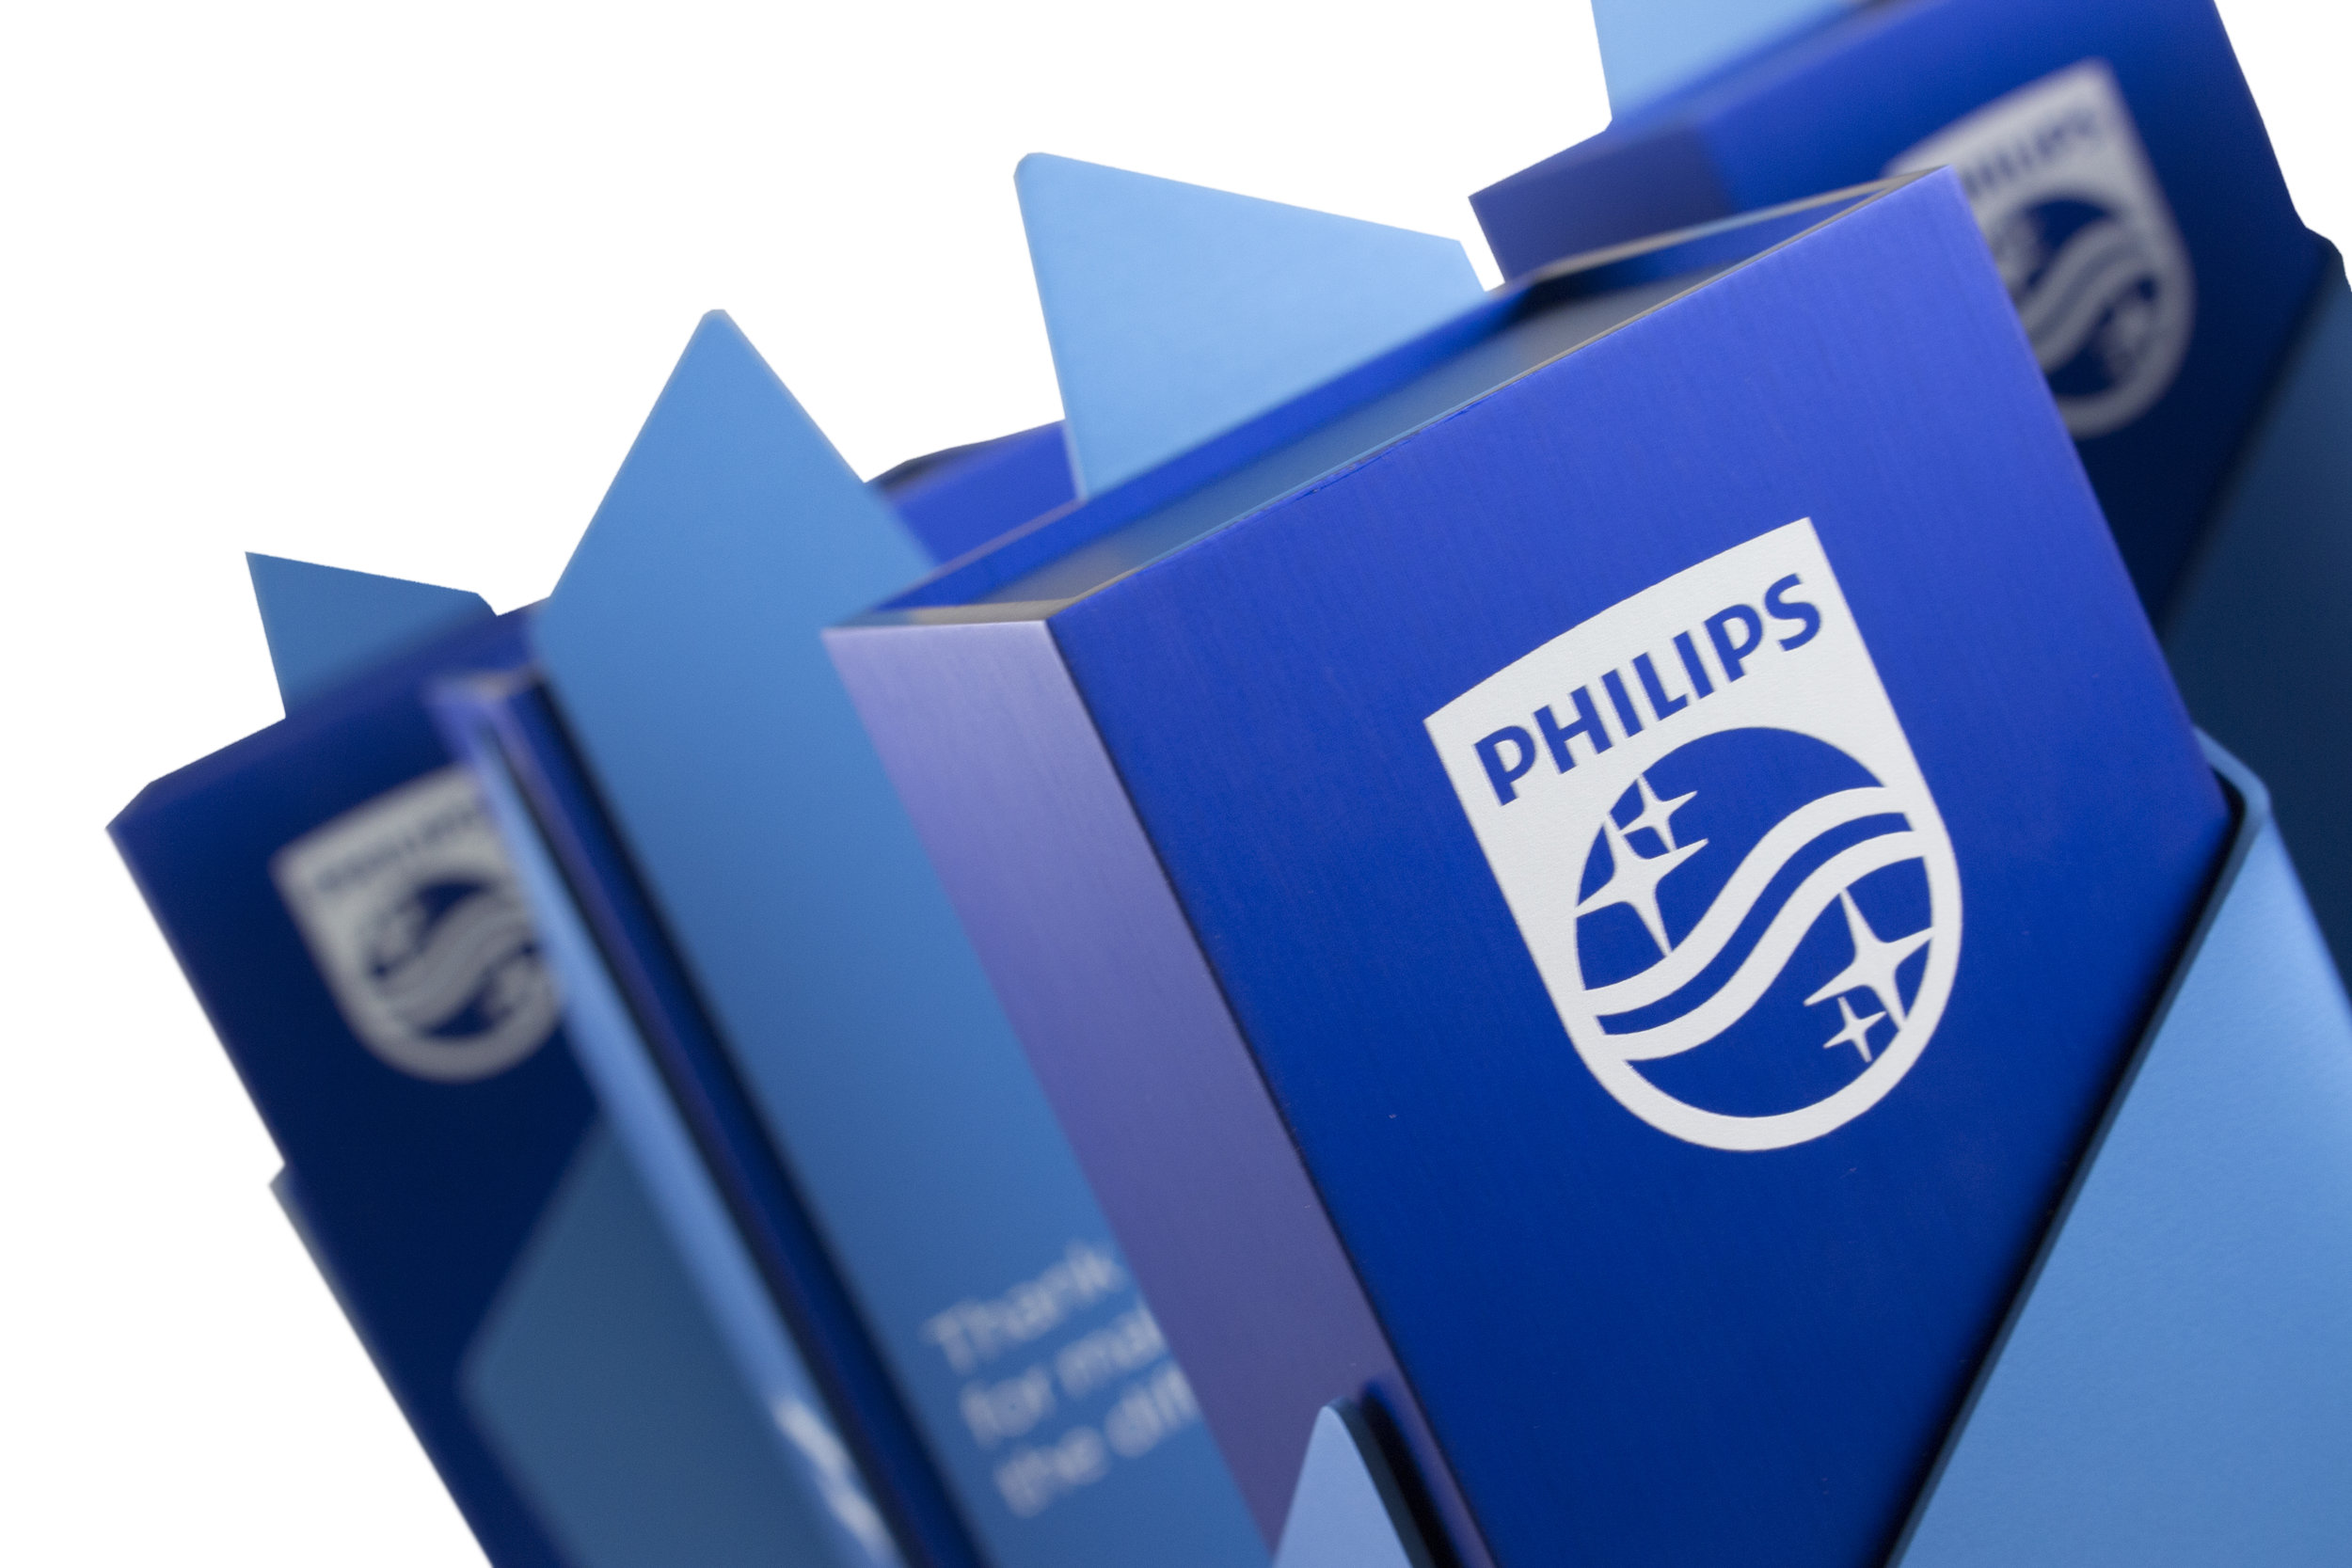 philips 2016 trophy group angled close up BryceEdit.jpg